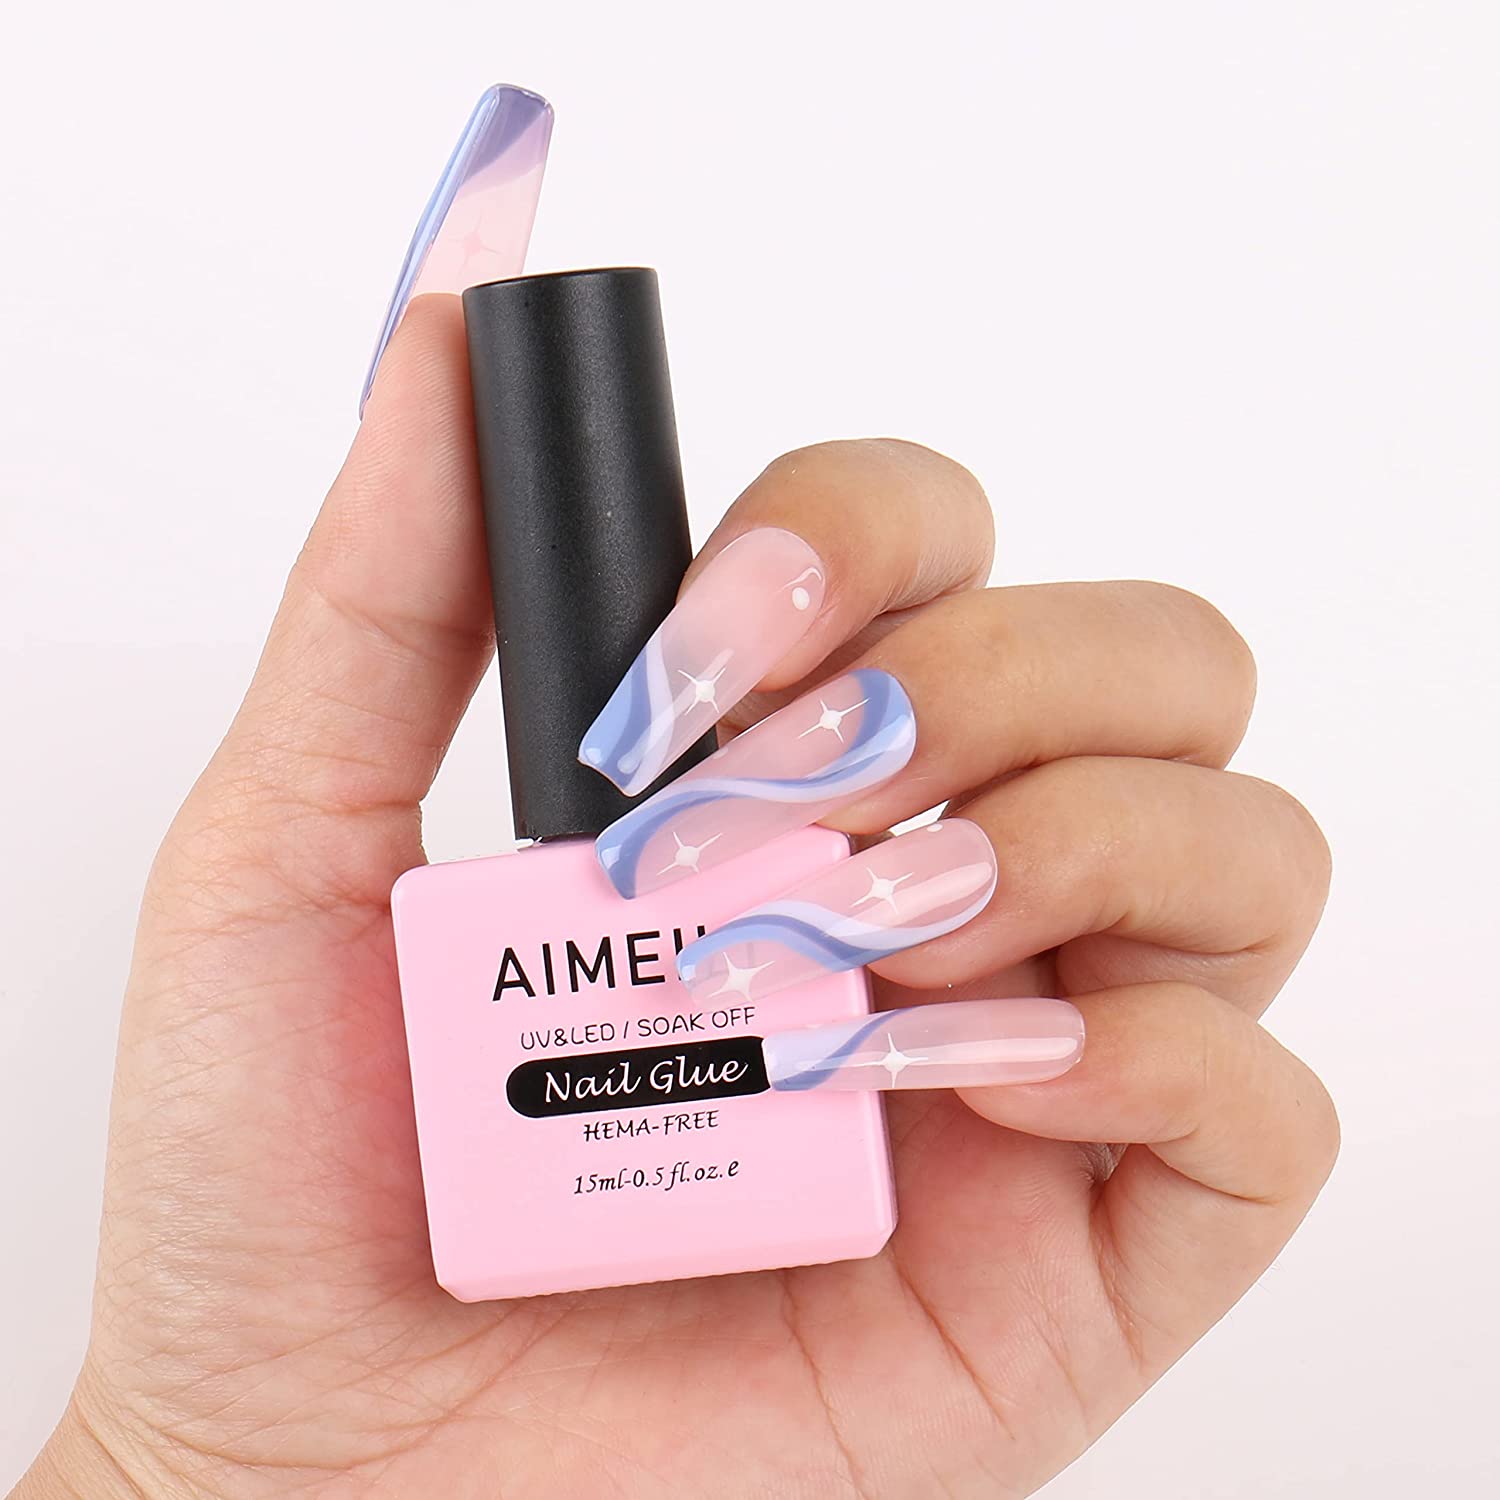 Can You Use UV Gel As Nail Glue?